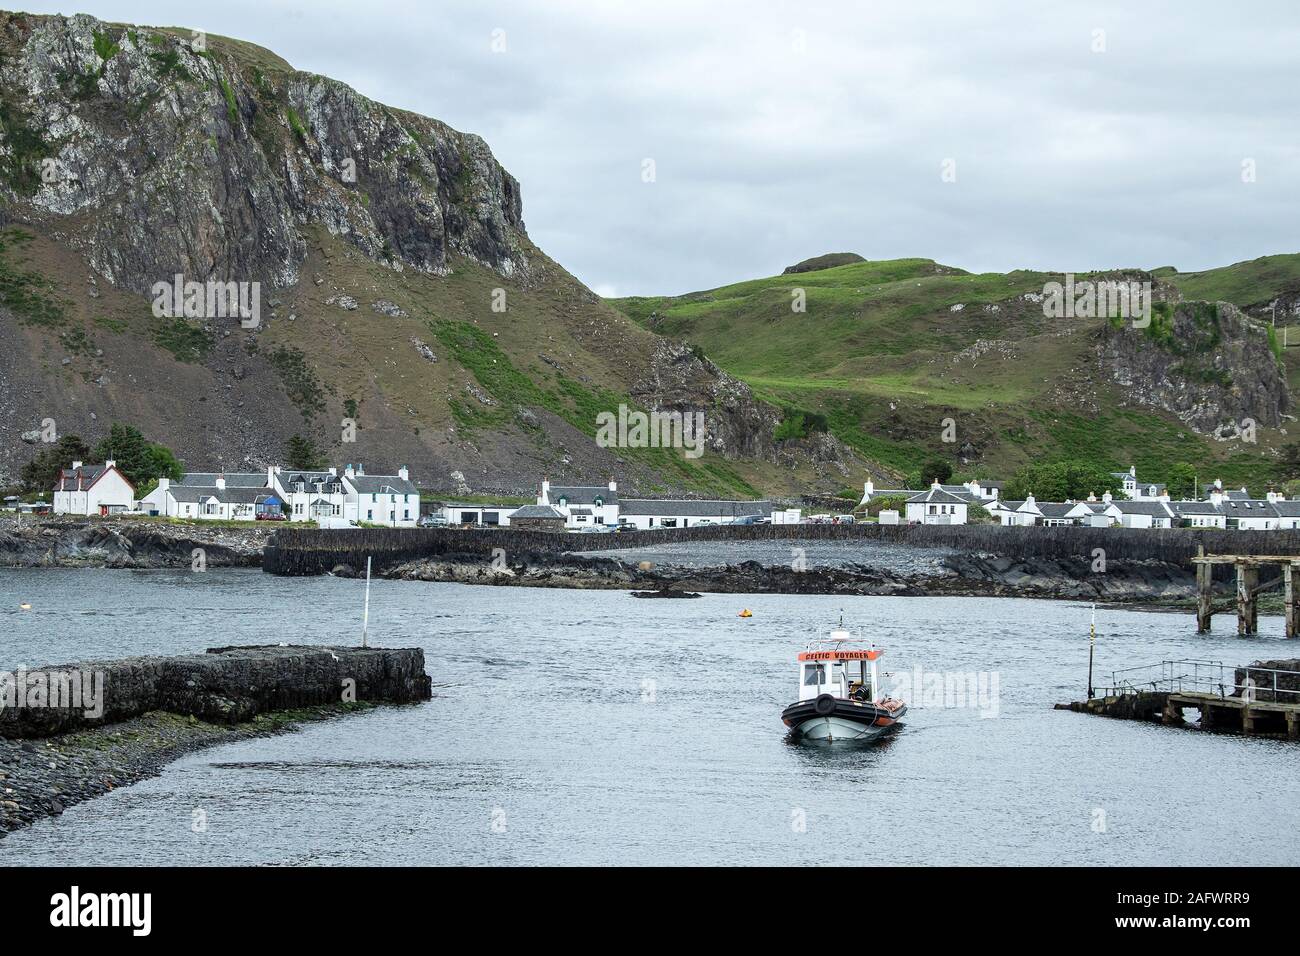 Looking back towards the harbour of Ellenabeich, a small village on the isle of Seil  from Easdale Island with the small ferry boat approaching Stock Photo